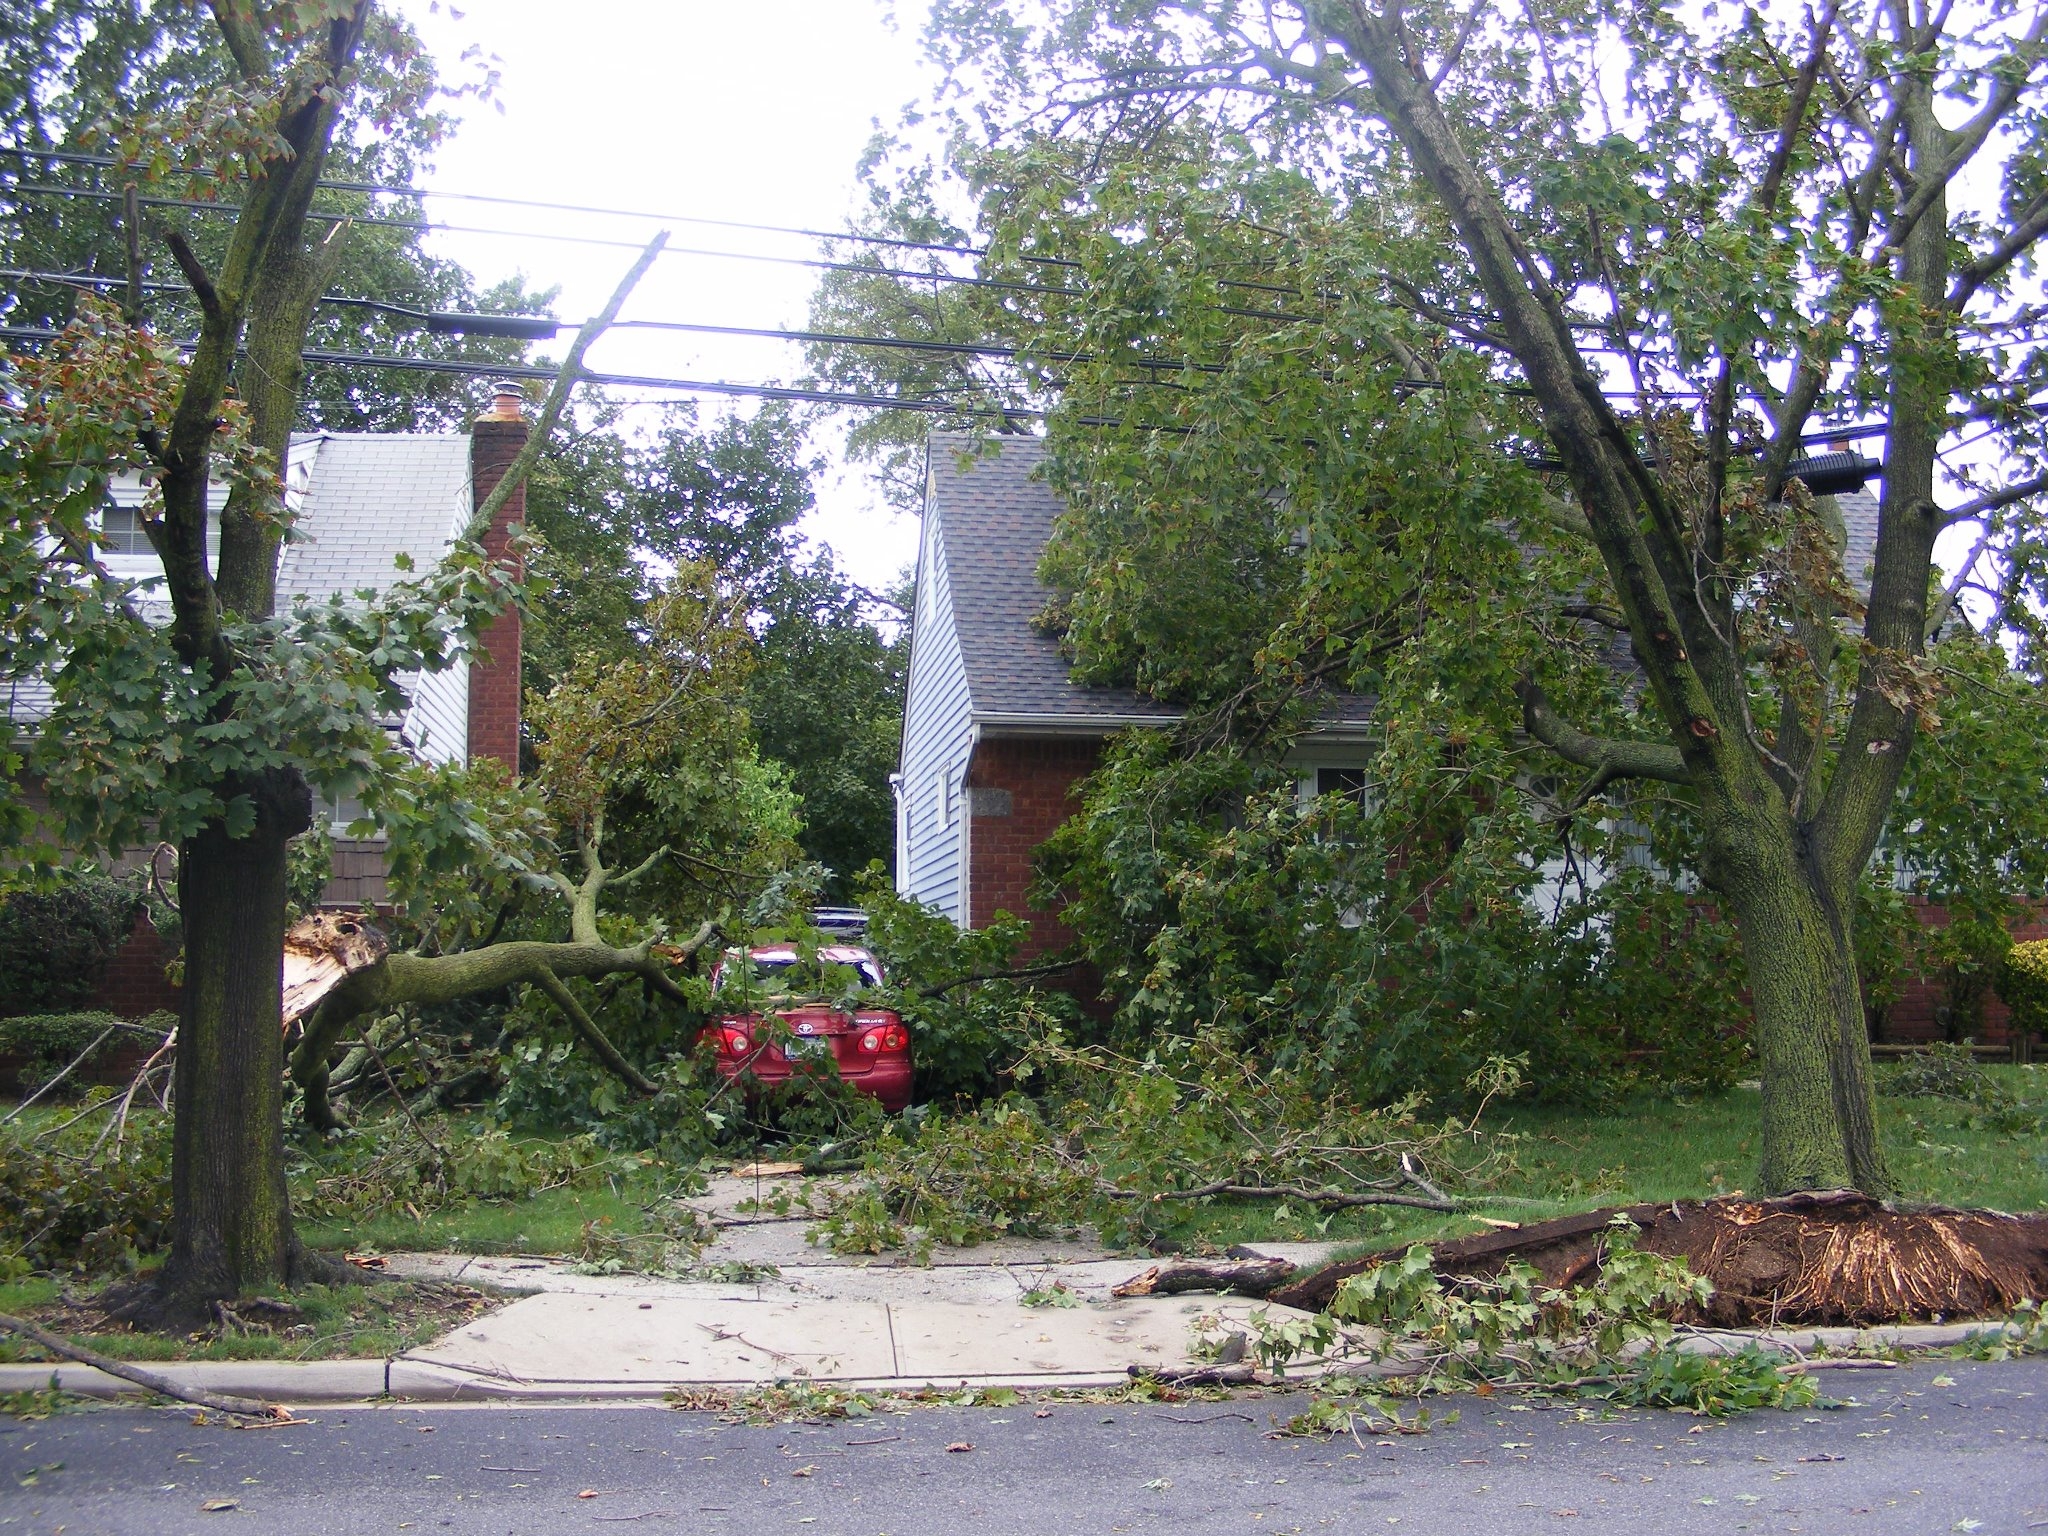 in-elmont-nassau-county-one-tree-took-out-the-car-another-landed-on-the-house-facebook-fan-pic-by-kathy-yasenchak-mcmanus.jpg 